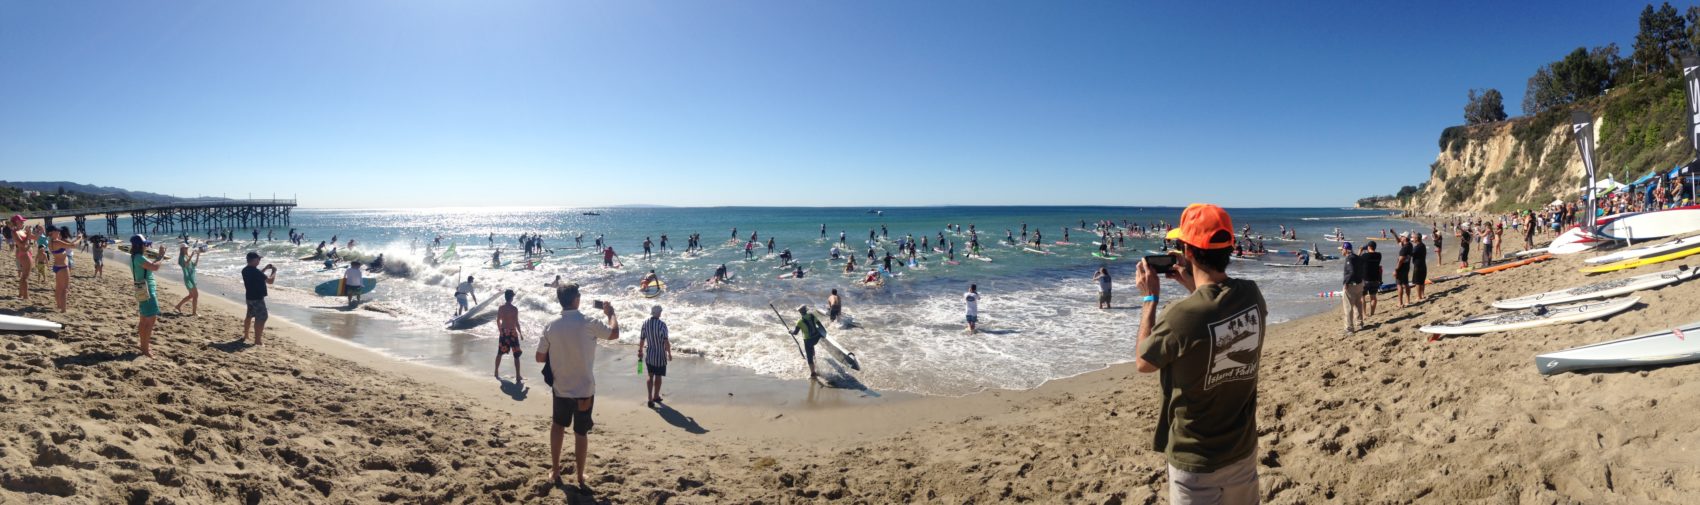 A lot of surfers in the water